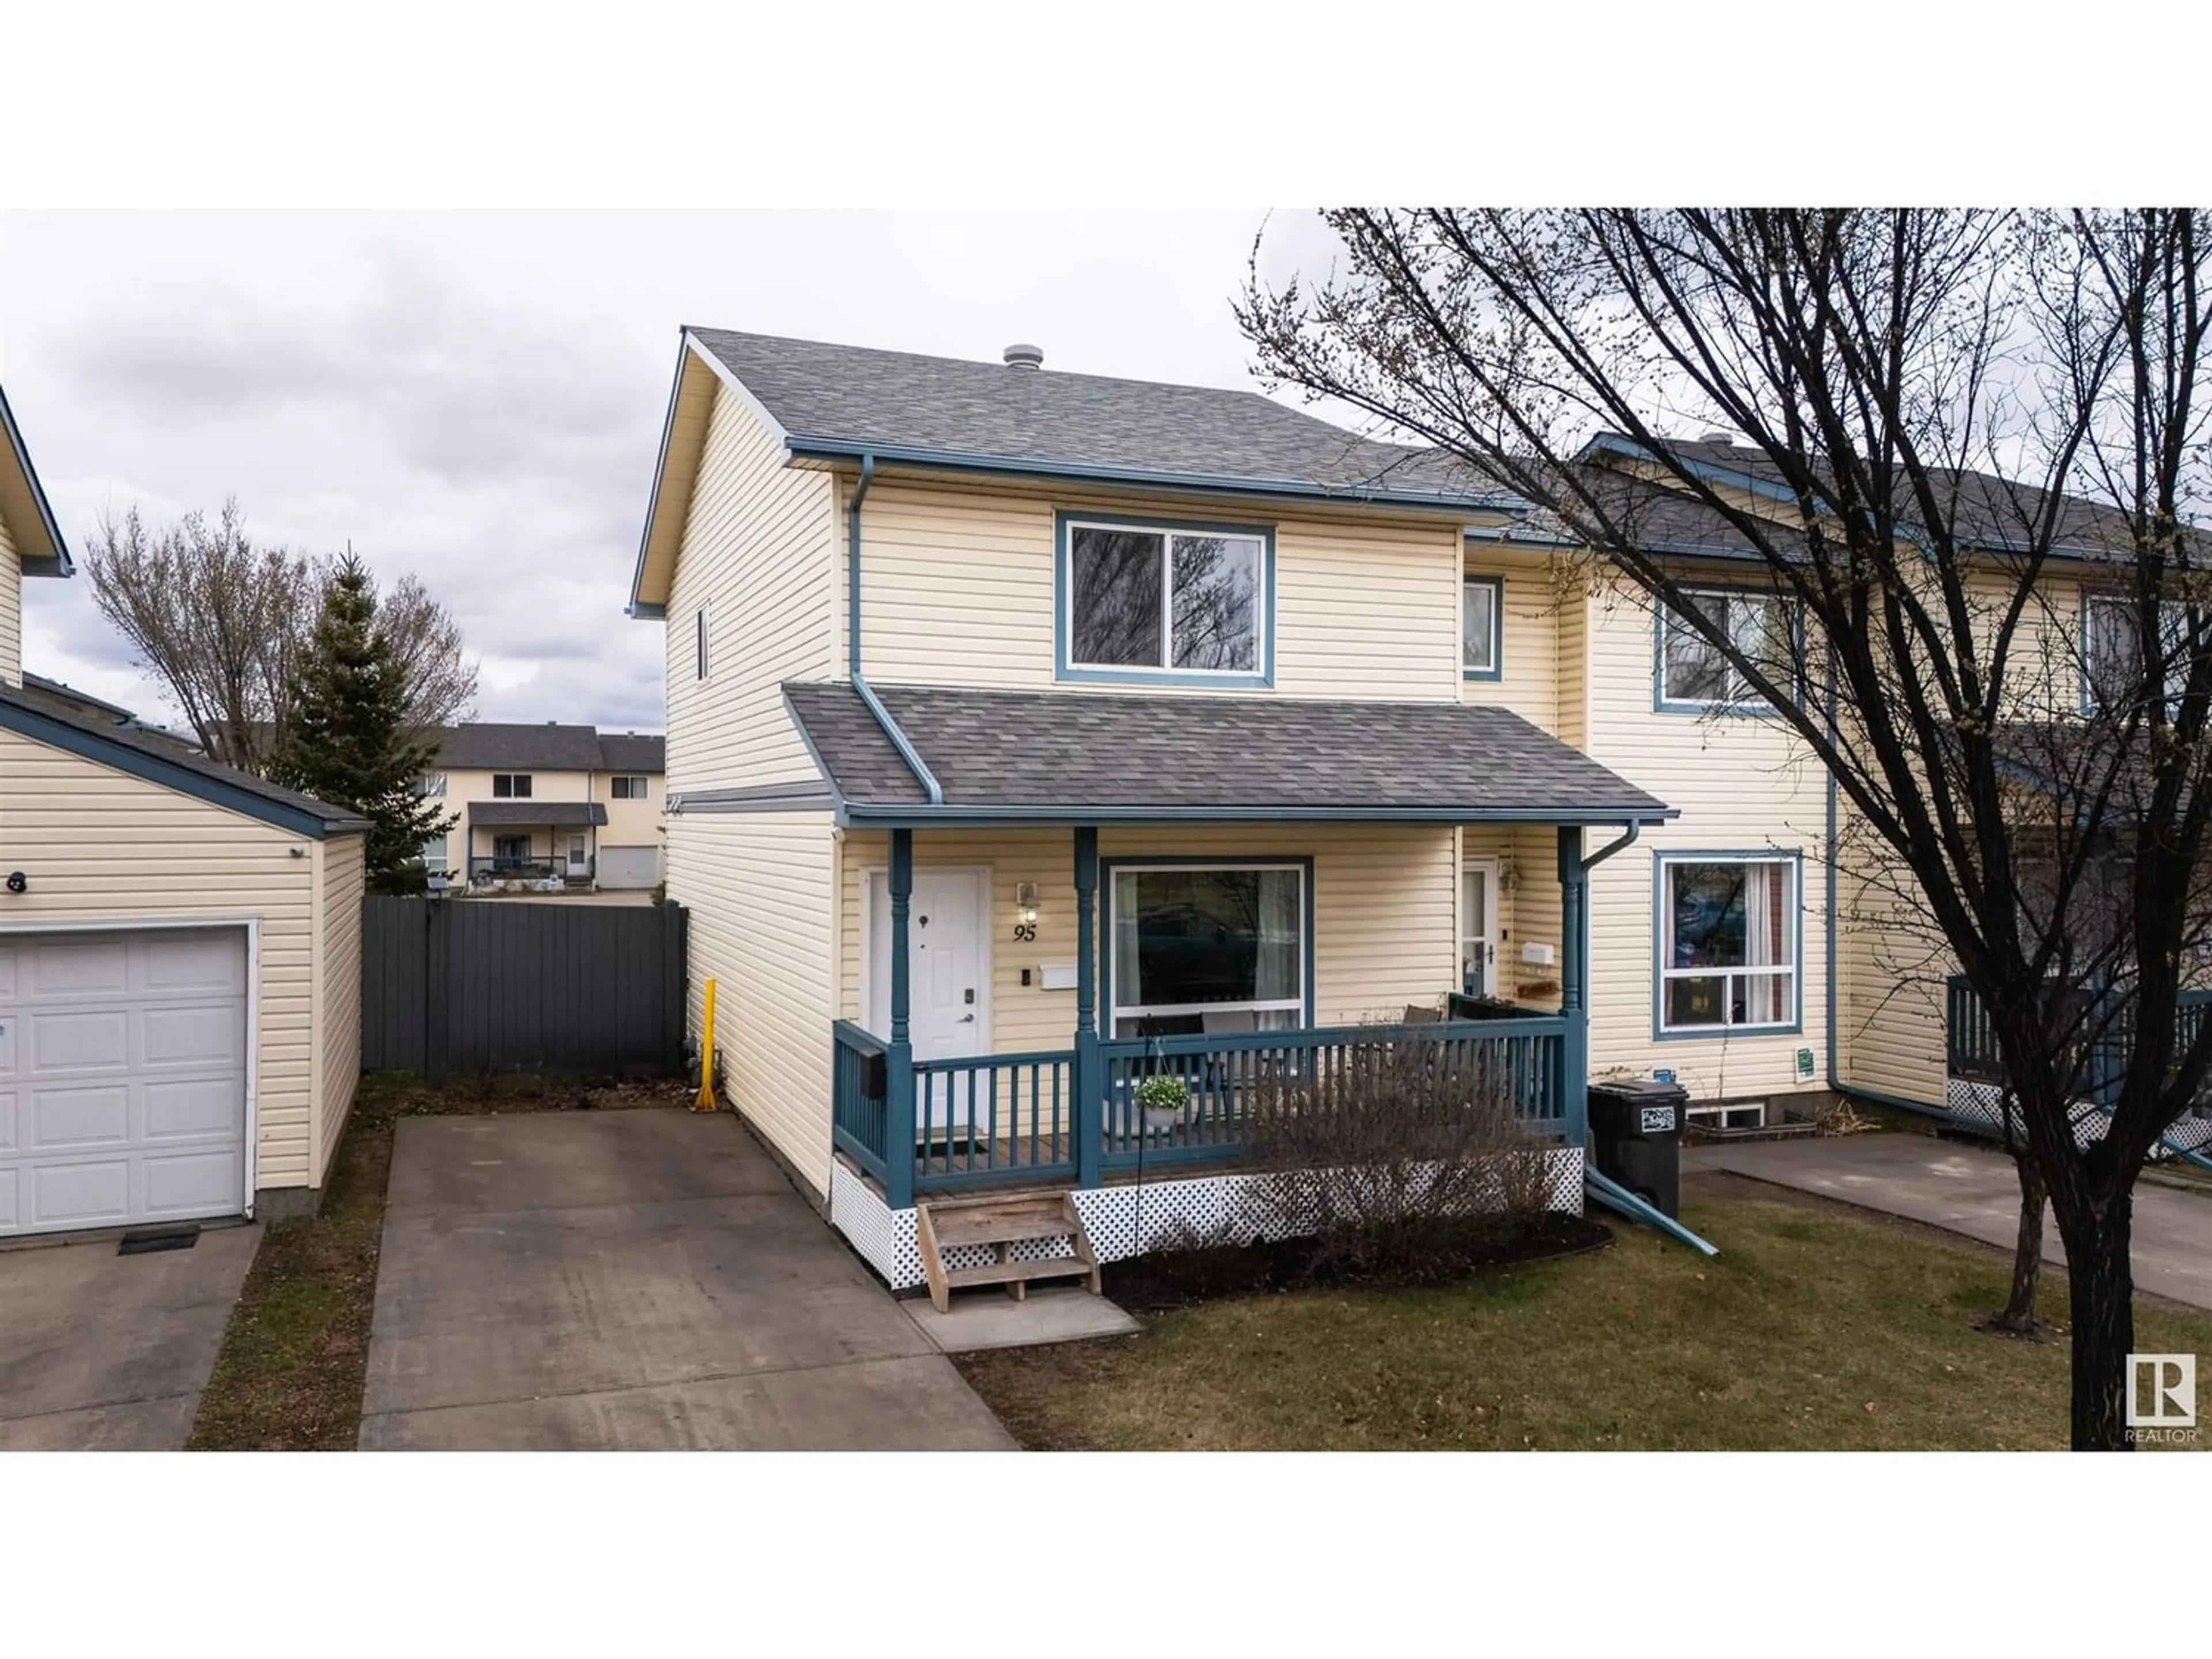 Frontside or backside of a home for #95 10909 106 ST NW, Edmonton Alberta T5H4M7